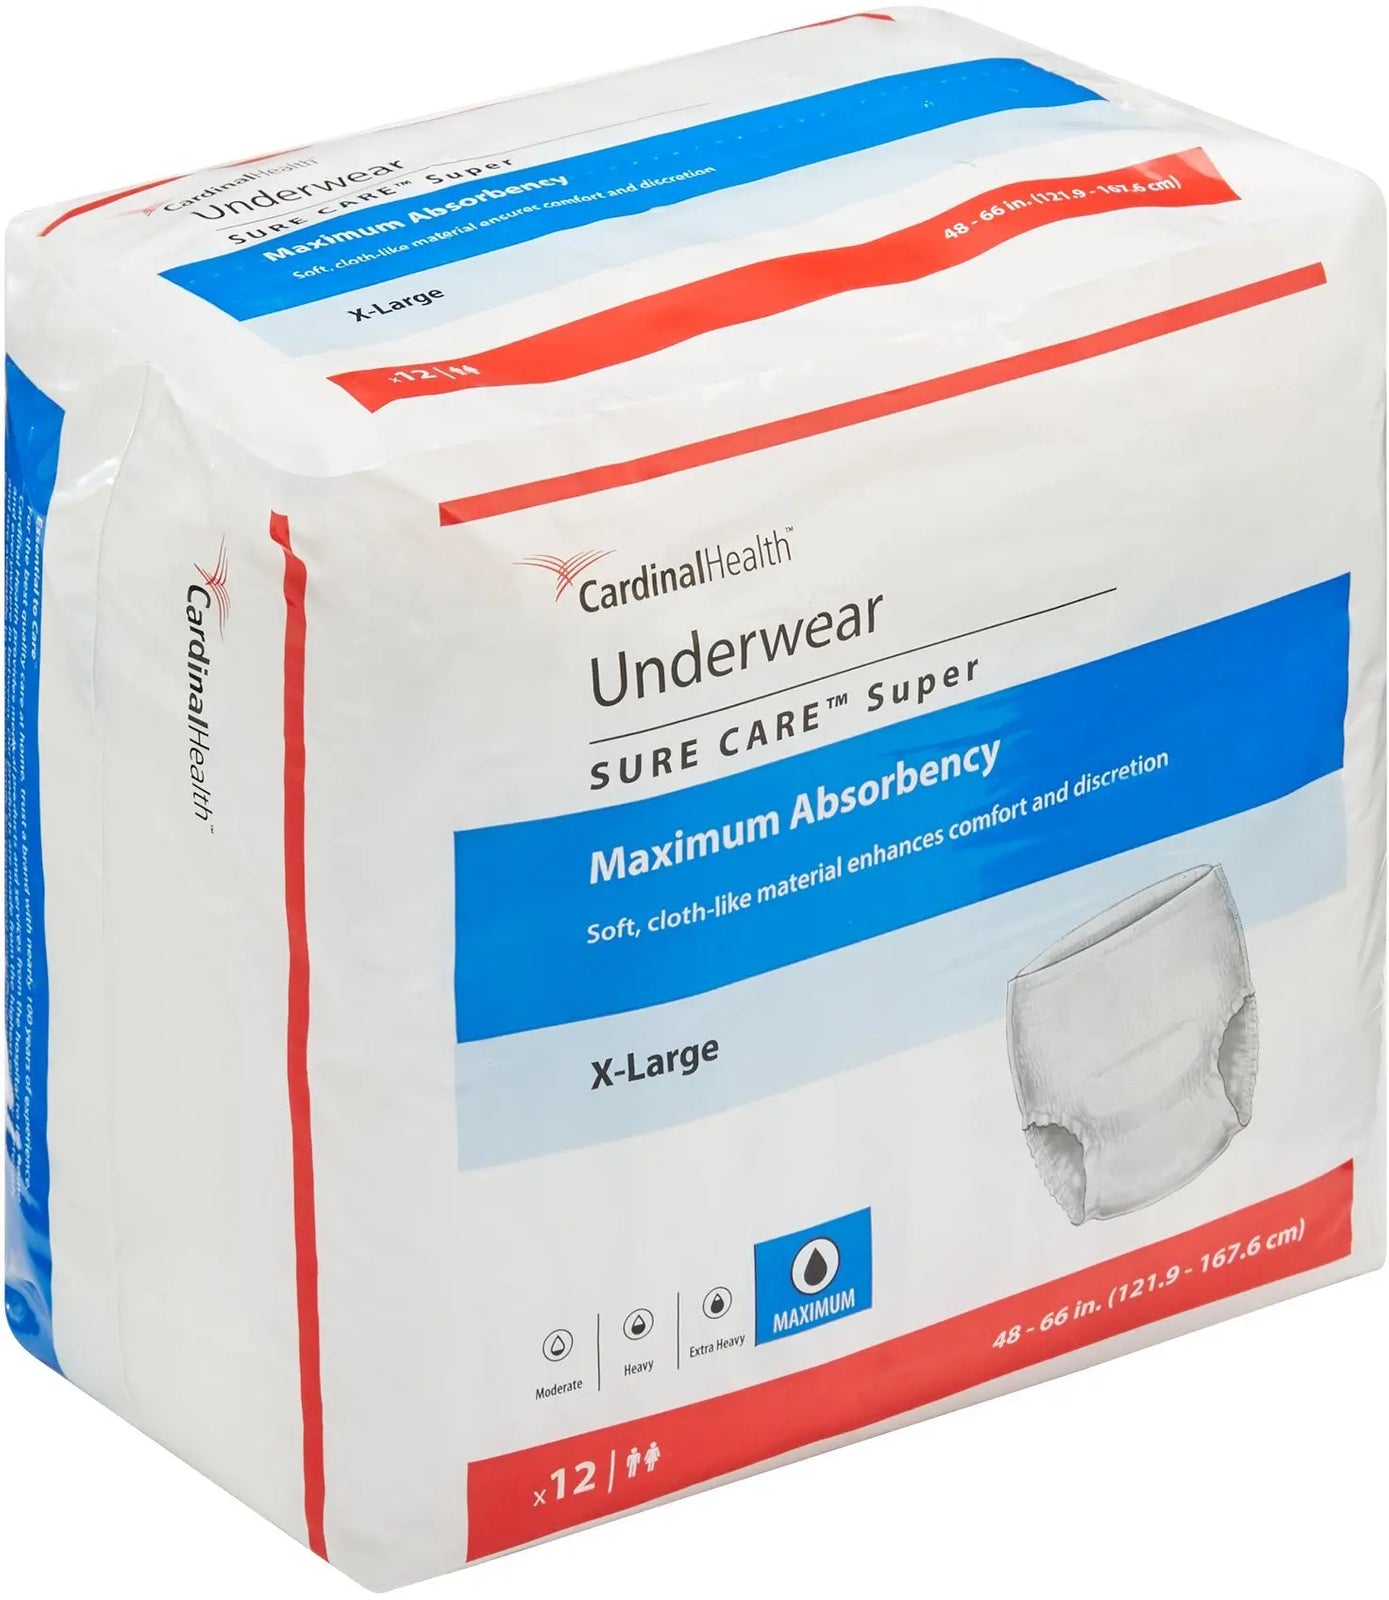 Sure Care Extra Protective Underwear with Moderate Absorbency